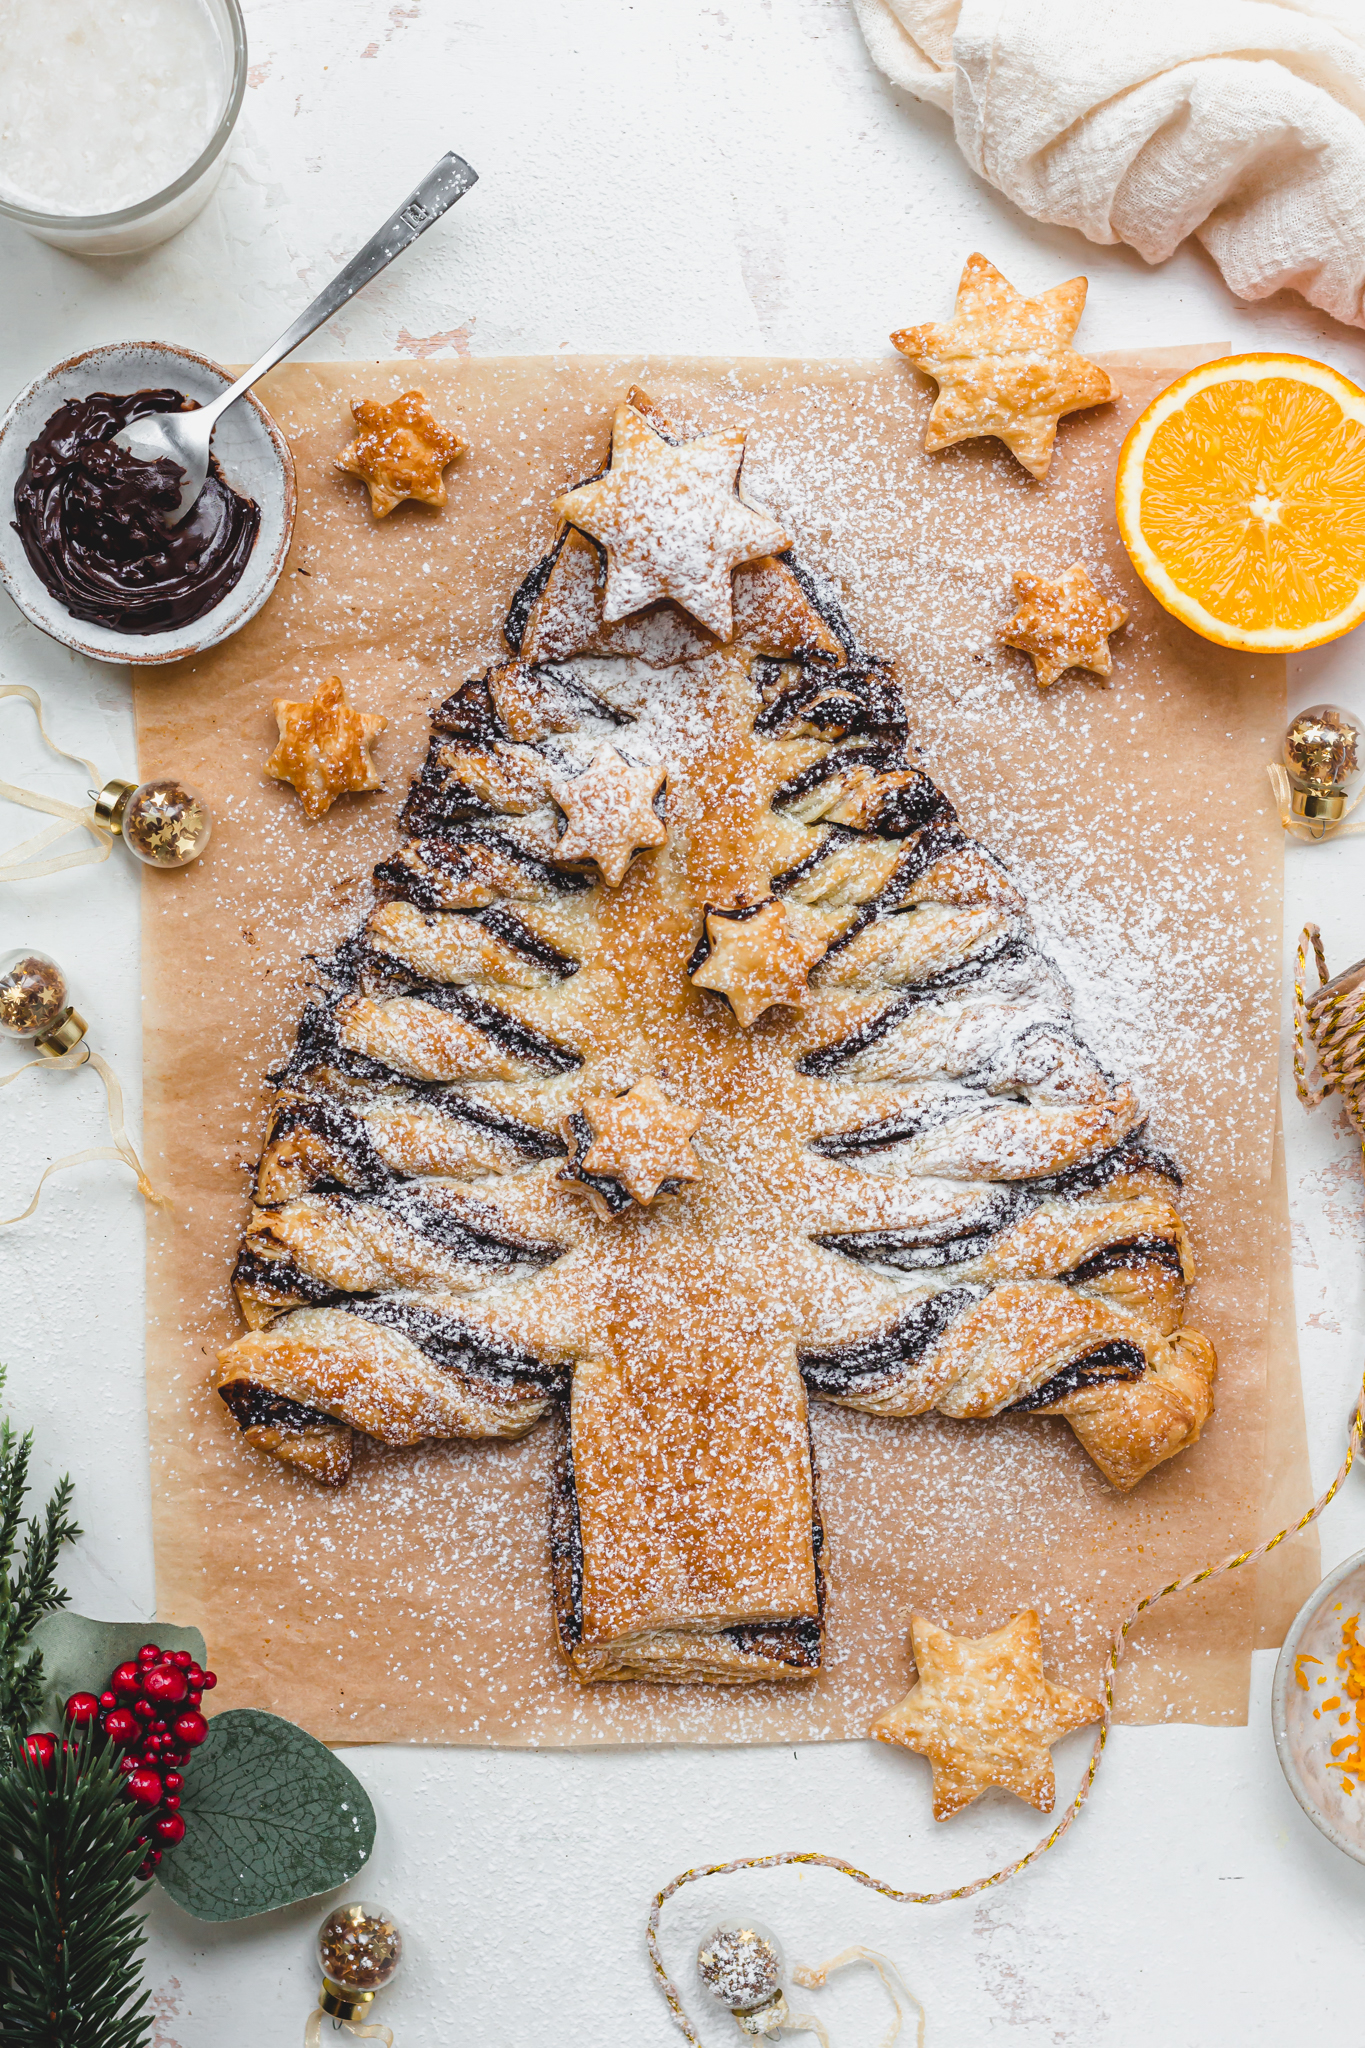 Dusted with icing sugar A Vegan Chocolate Orange Christmas Tree Pastry